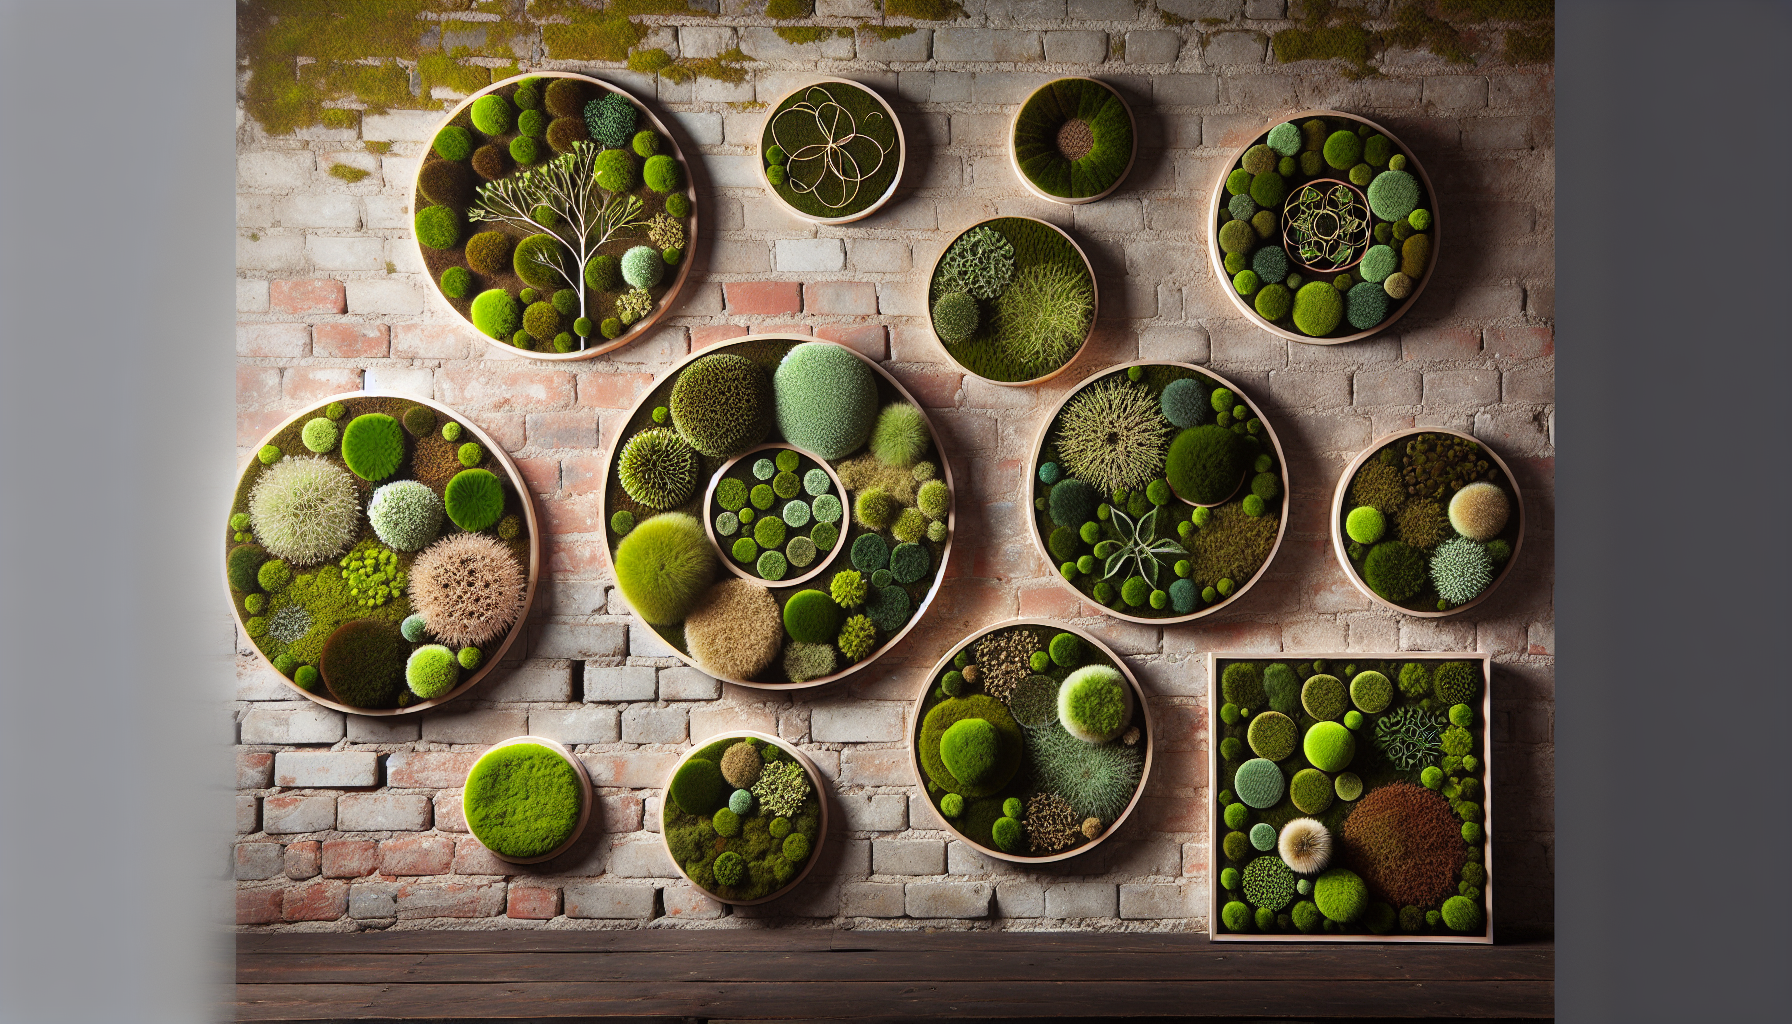 Various moss wall art designs including preserved moss and live moss